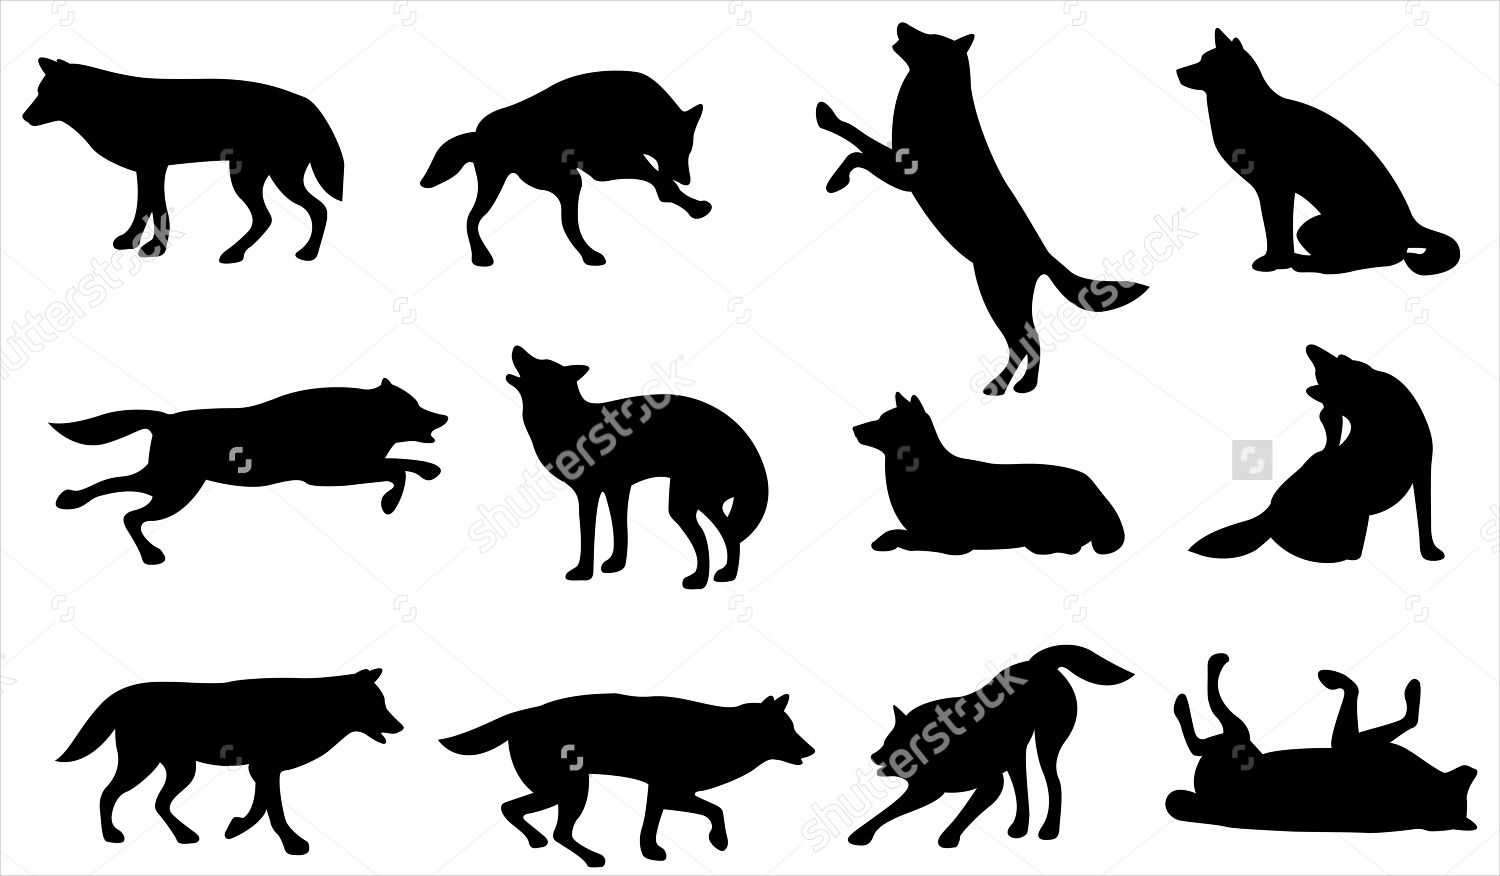 Download 8+ Wolf Silhouette Designs - Vector, EPS Format Download ...